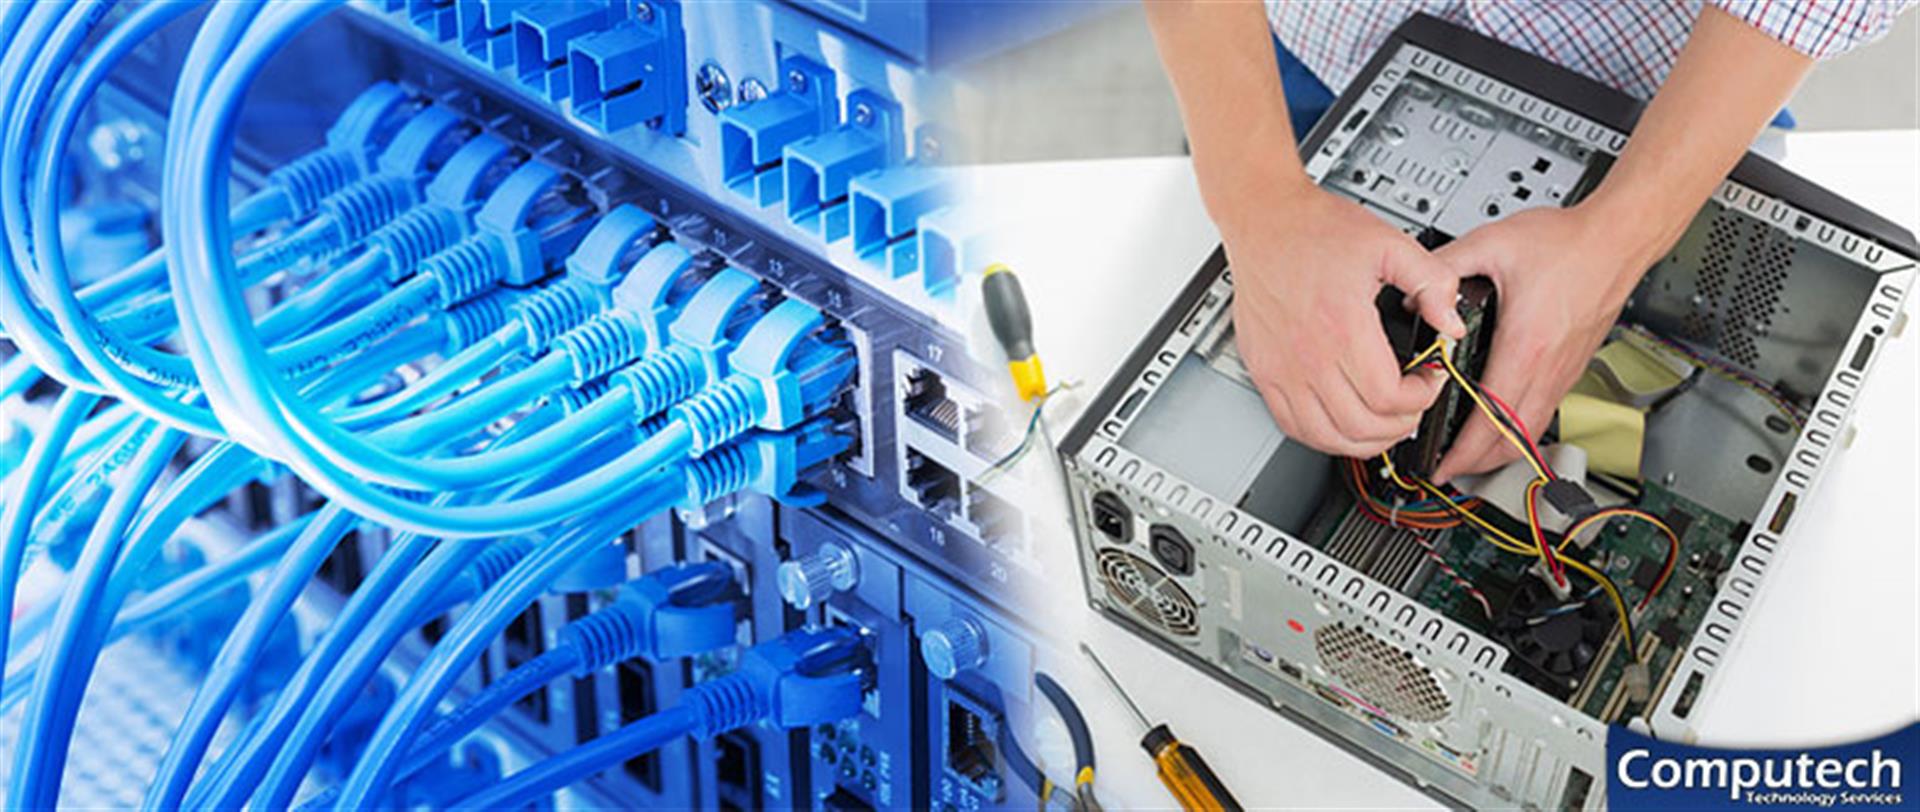 Hartselle Alabama Onsite PC & Printer Repair, Networking, Telecom & Data Low Voltage Cabling Services